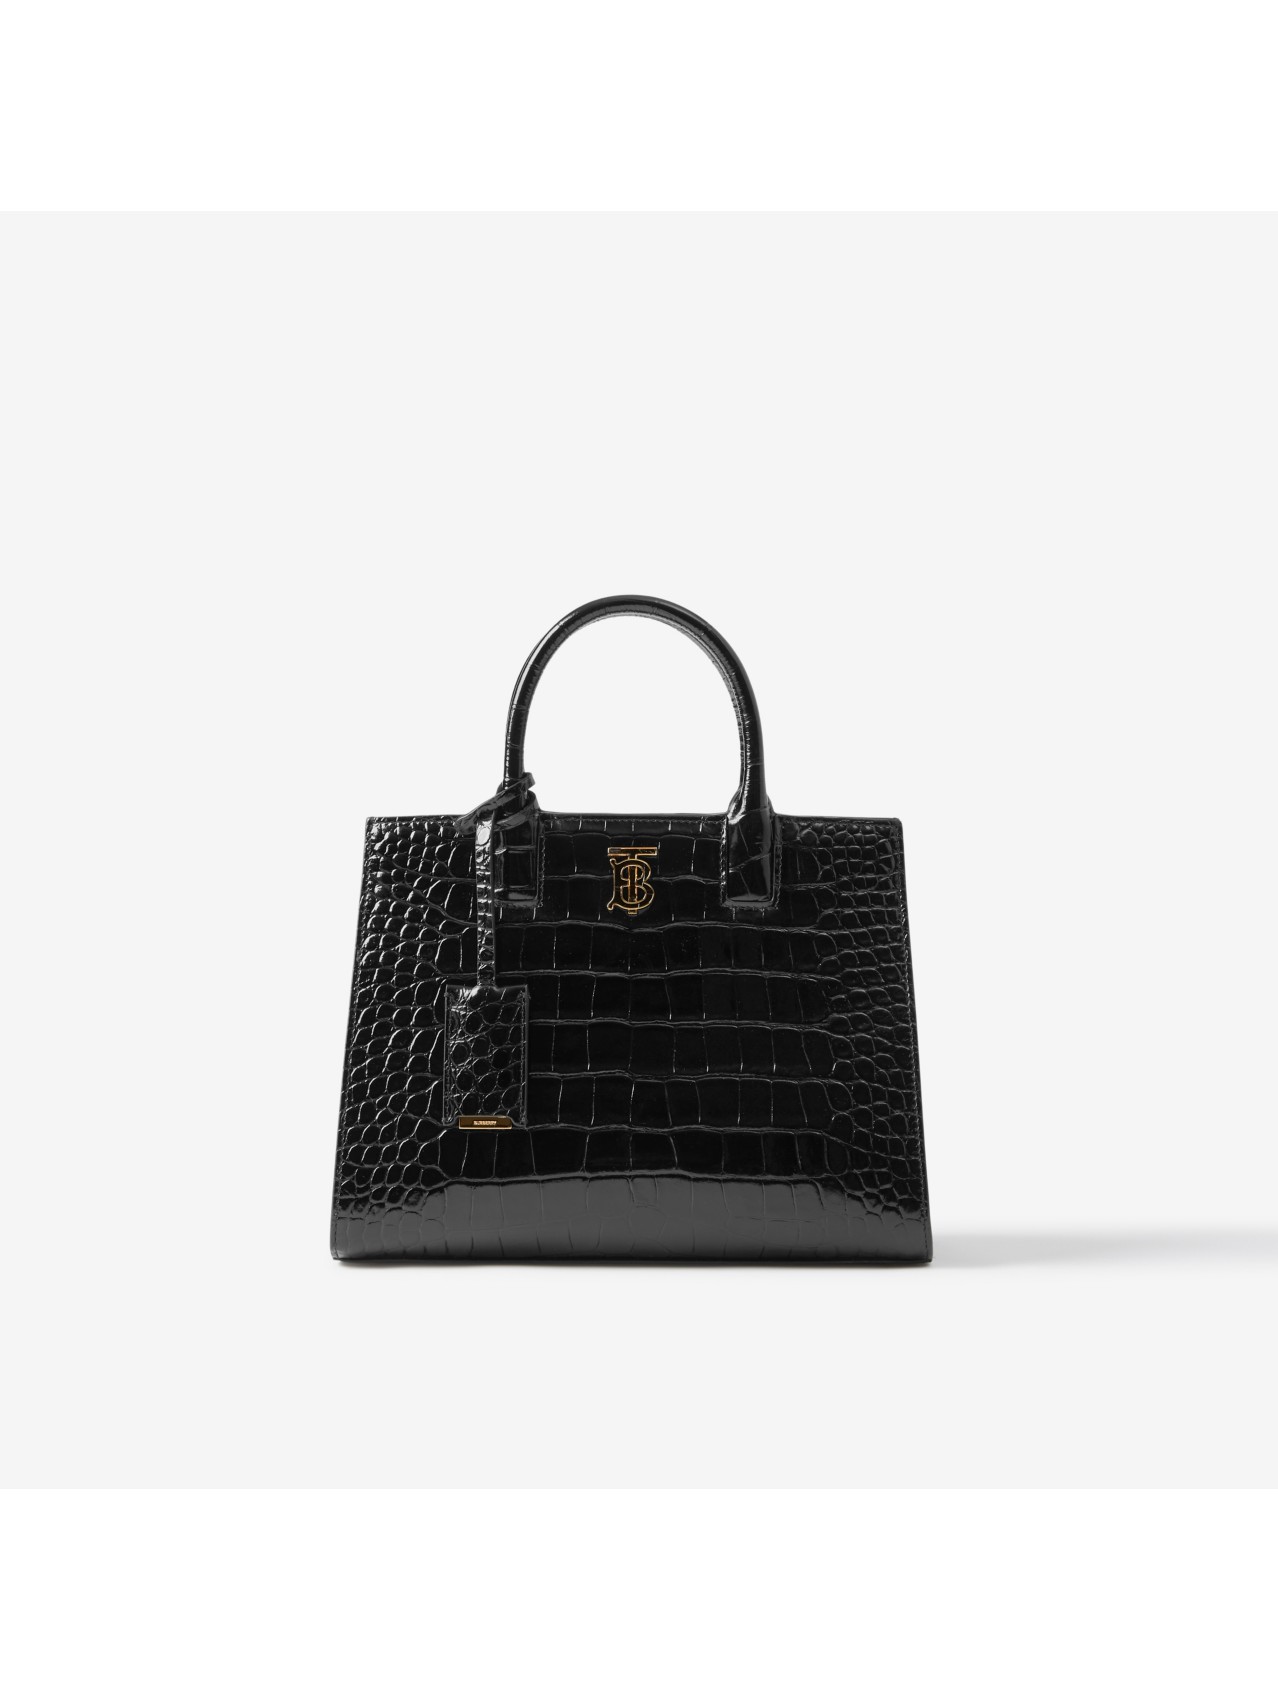 Women's Bags | Check & Leather Bags for Women | Burberry® Official